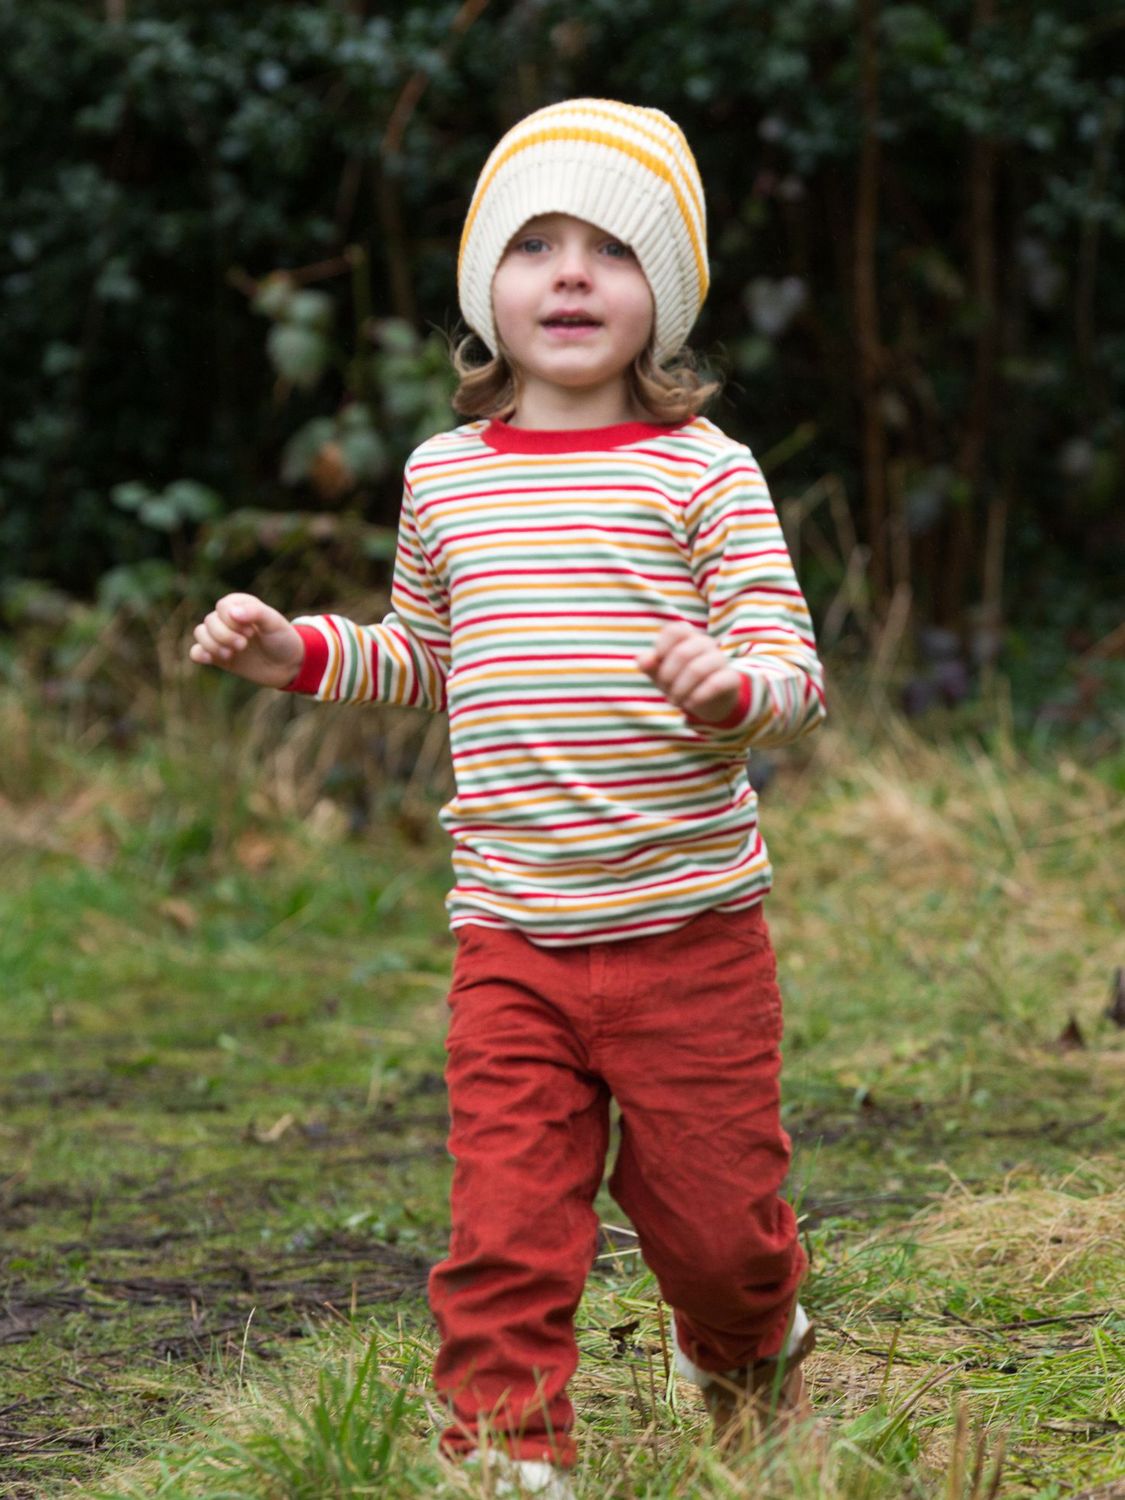 Buy Little Green Radicals Kids' Striped Knitted Beanie Hat, Gold Online at johnlewis.com